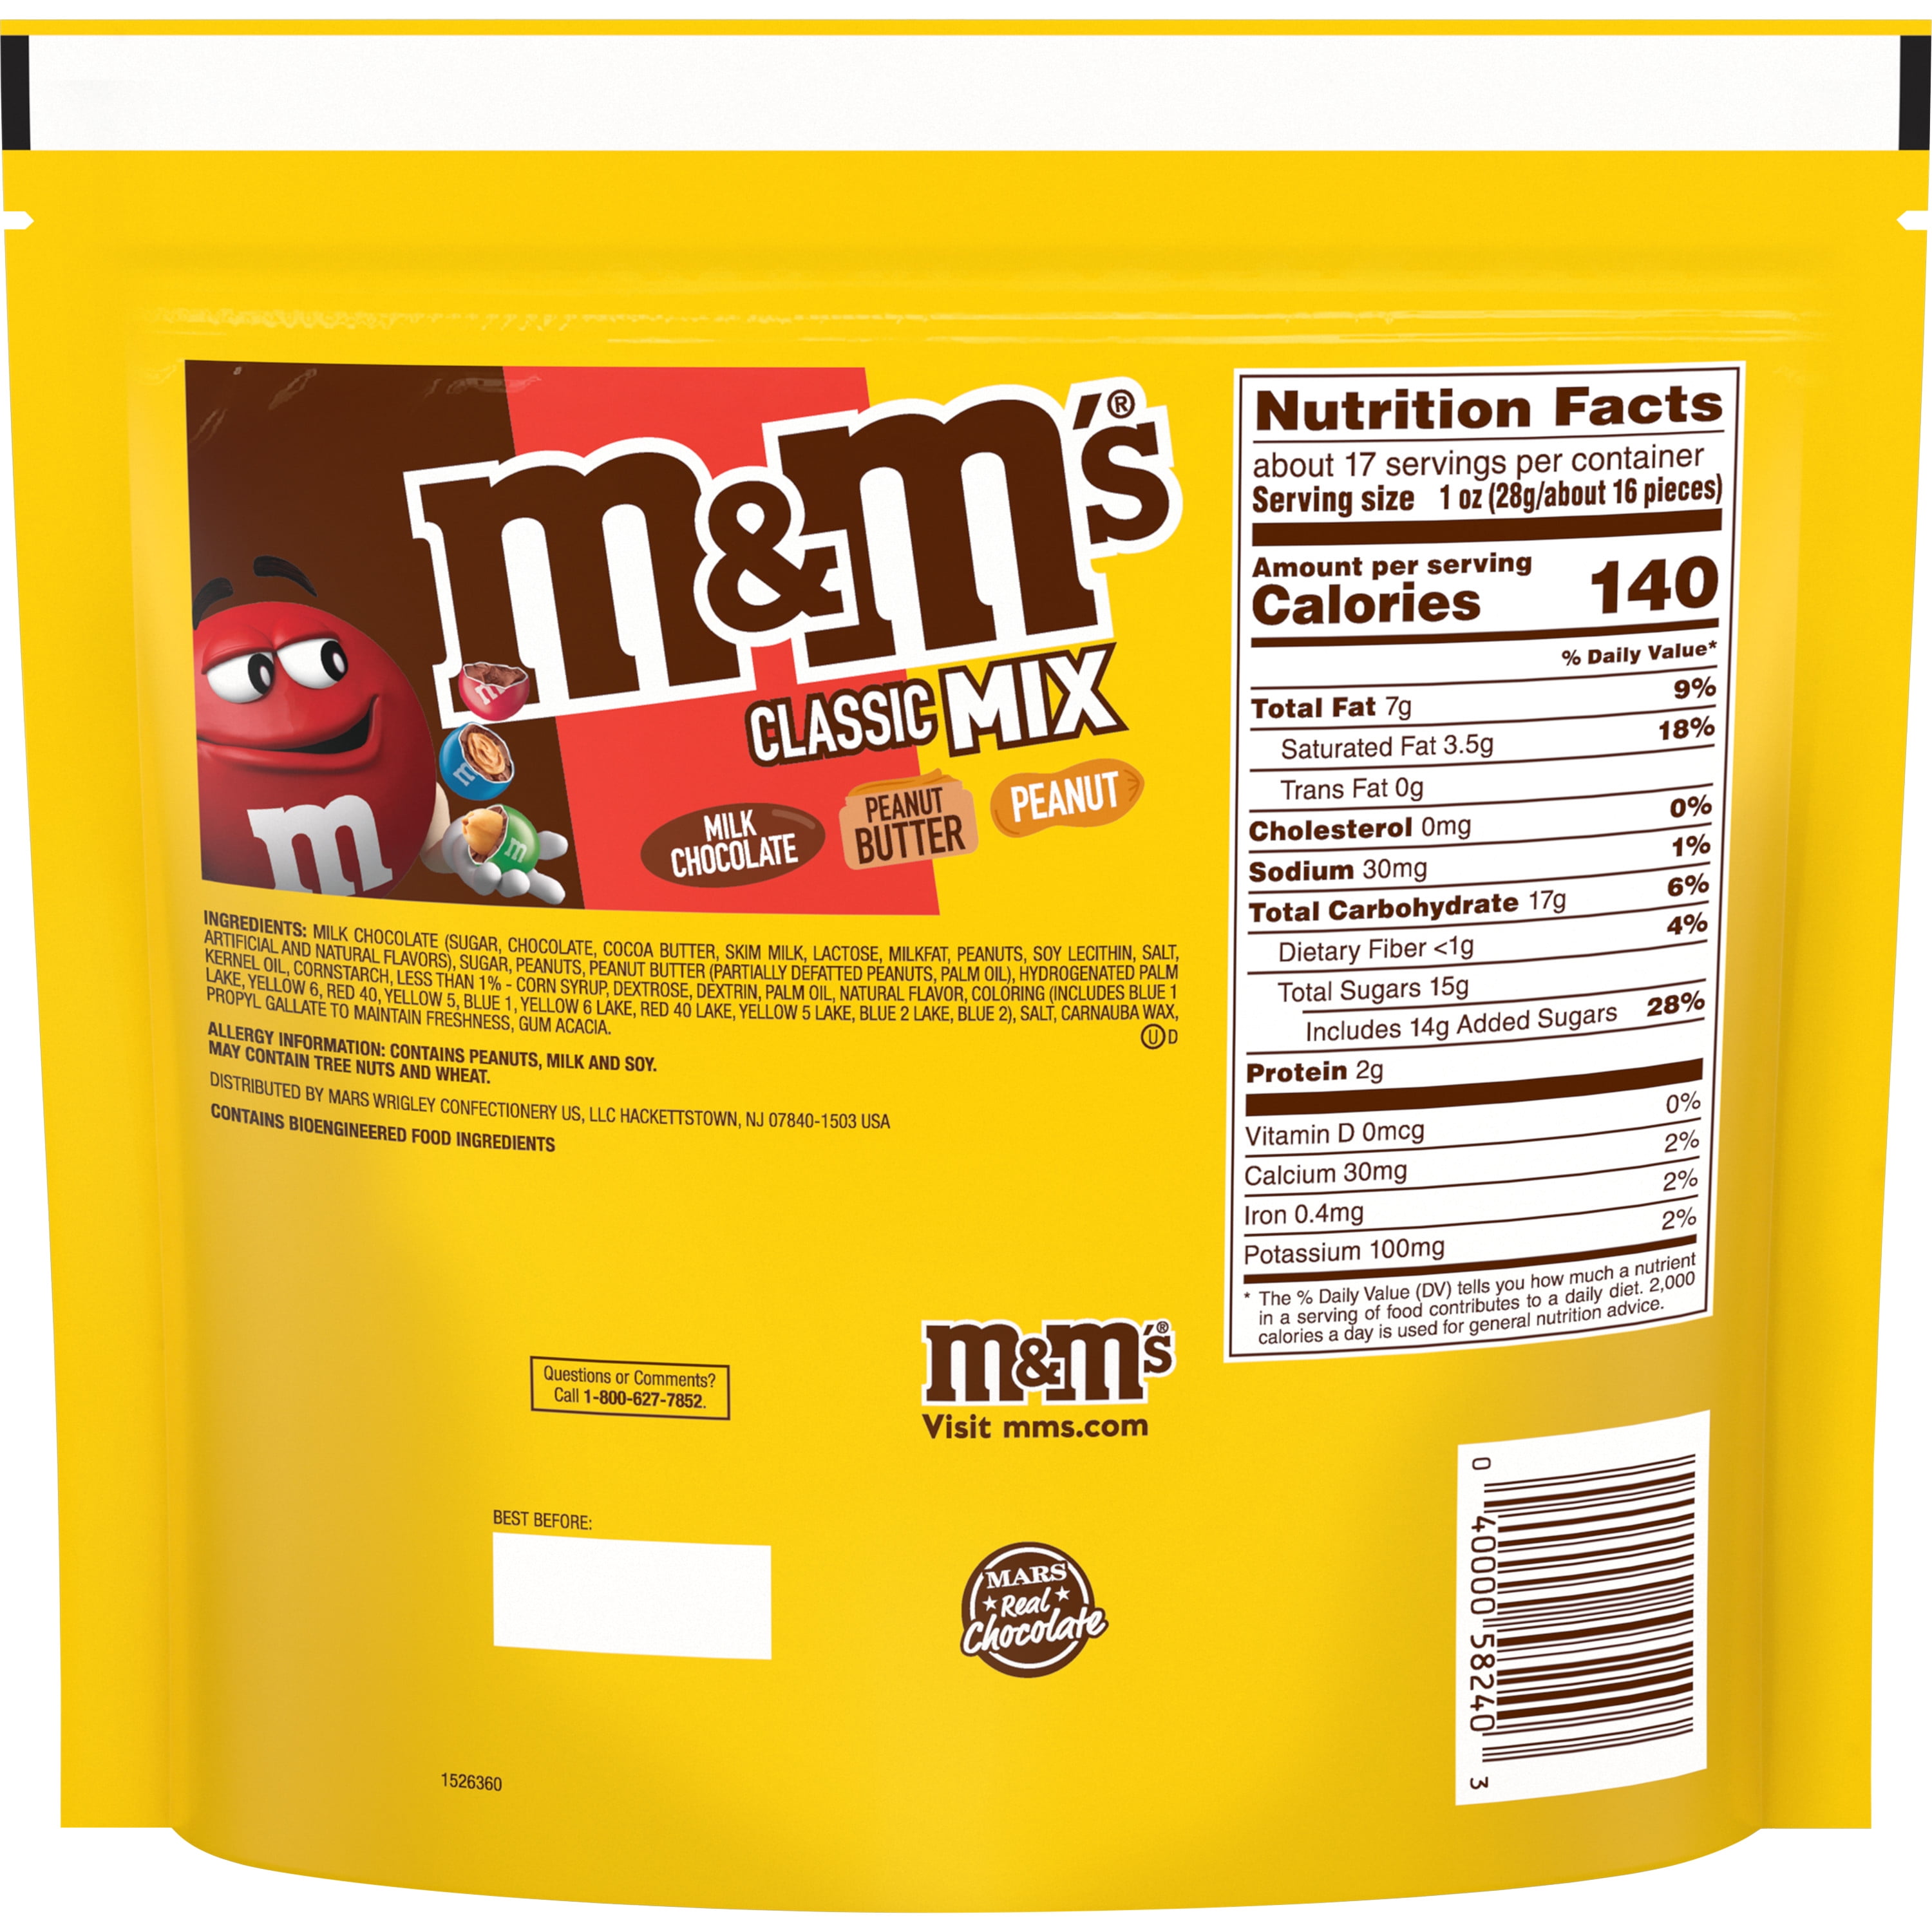 M&M's Chocolate Candies, Peanut Butter, Family Size 17.2 oz